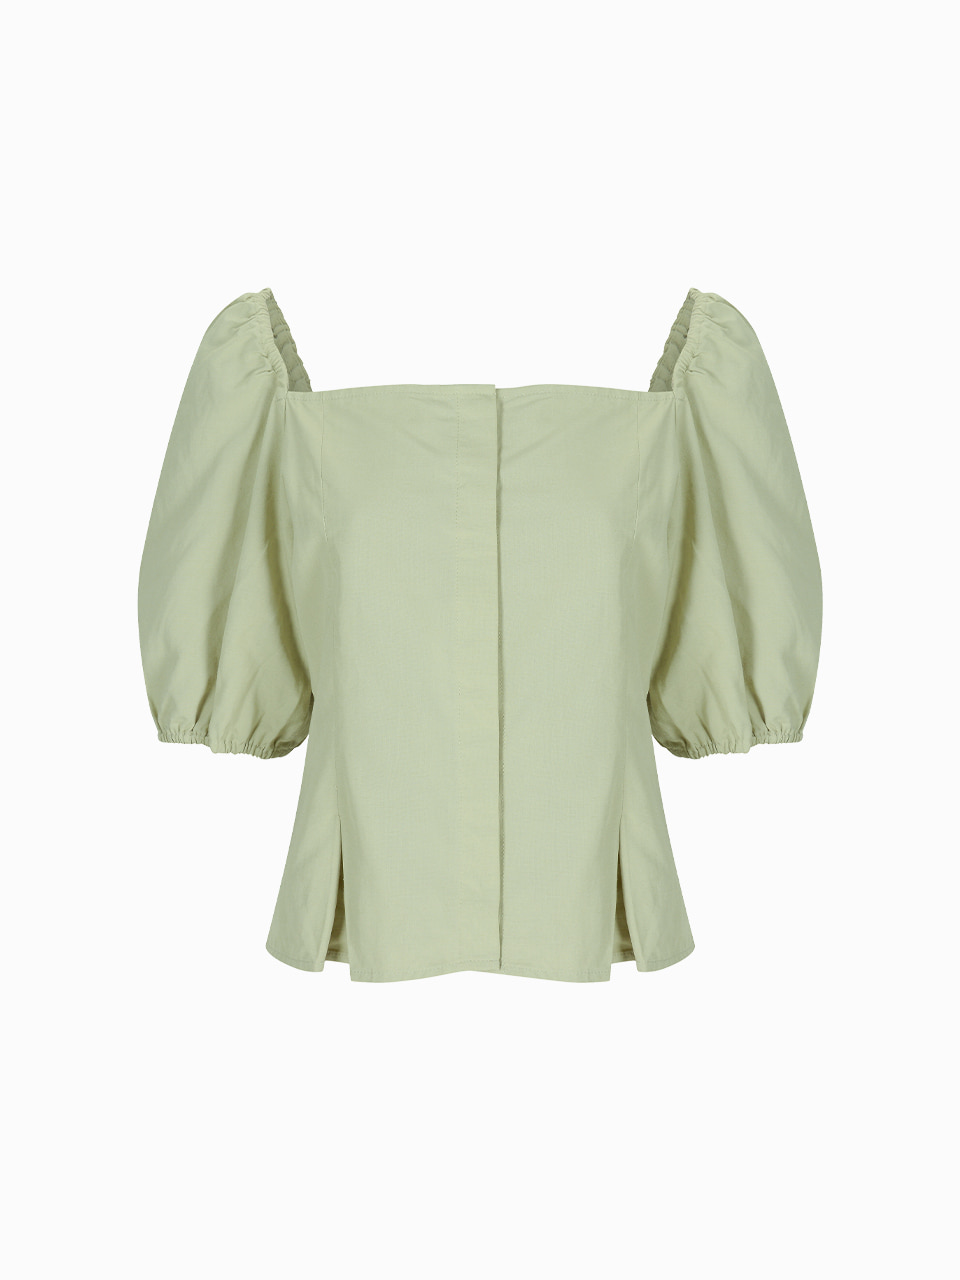 HACIE - BUSTIER PUFF-SLEEVE TOP [MINT]